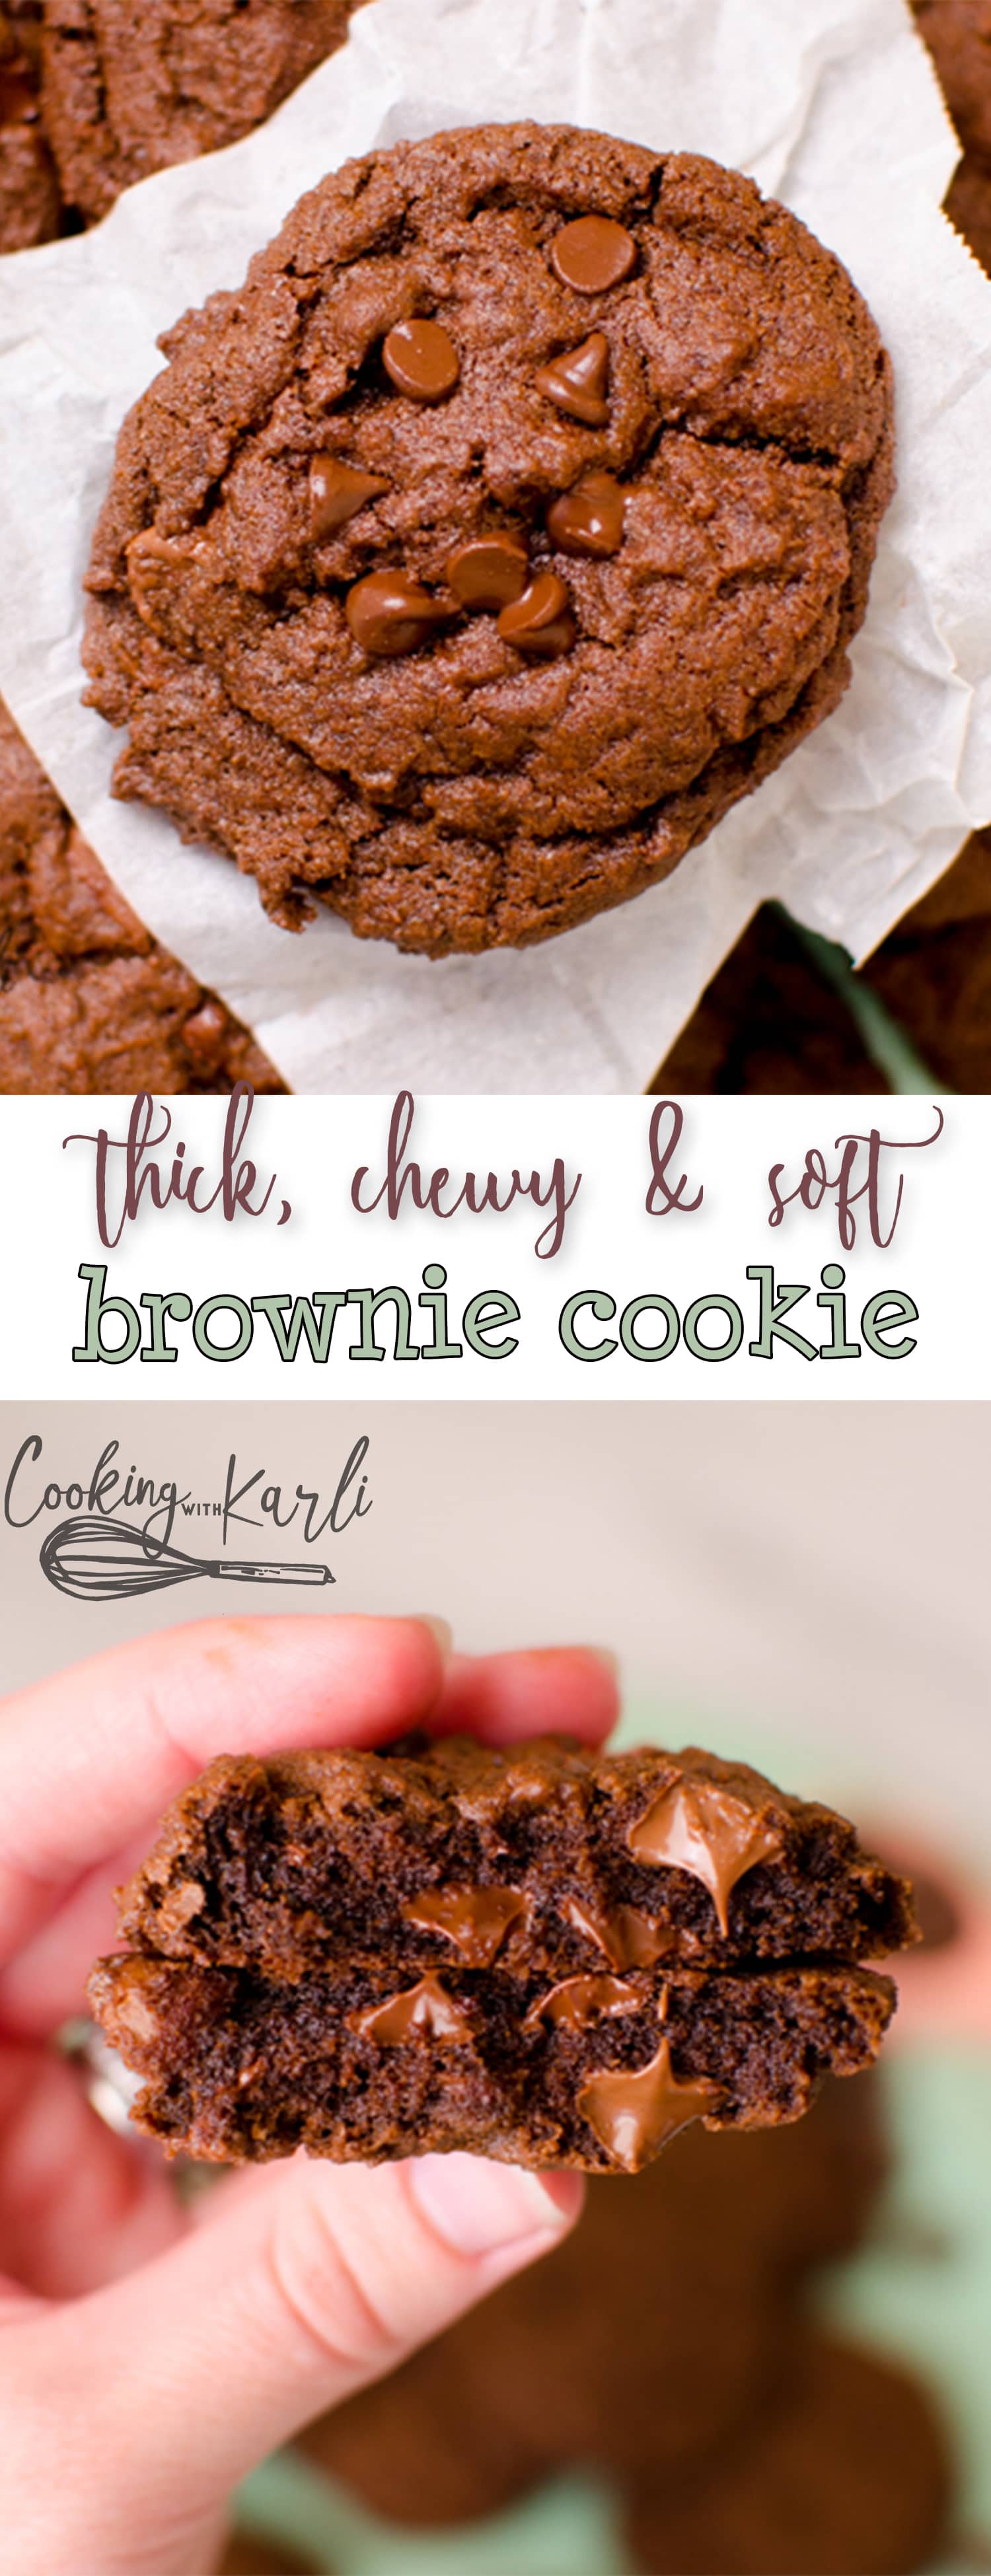 Chocolate Cookies are a rich chocolate cookie filled with chocolate chips. These Chocolate Cookies are thick, chewy, and soft. They almost taste like a brownie! Eat the cookies alone or top them with some ice cream, either way you've got the best chocolate cookie ever! |Cooking with Karli| #cookies #chocolate #double #triple #recipe #dessert #brownie 